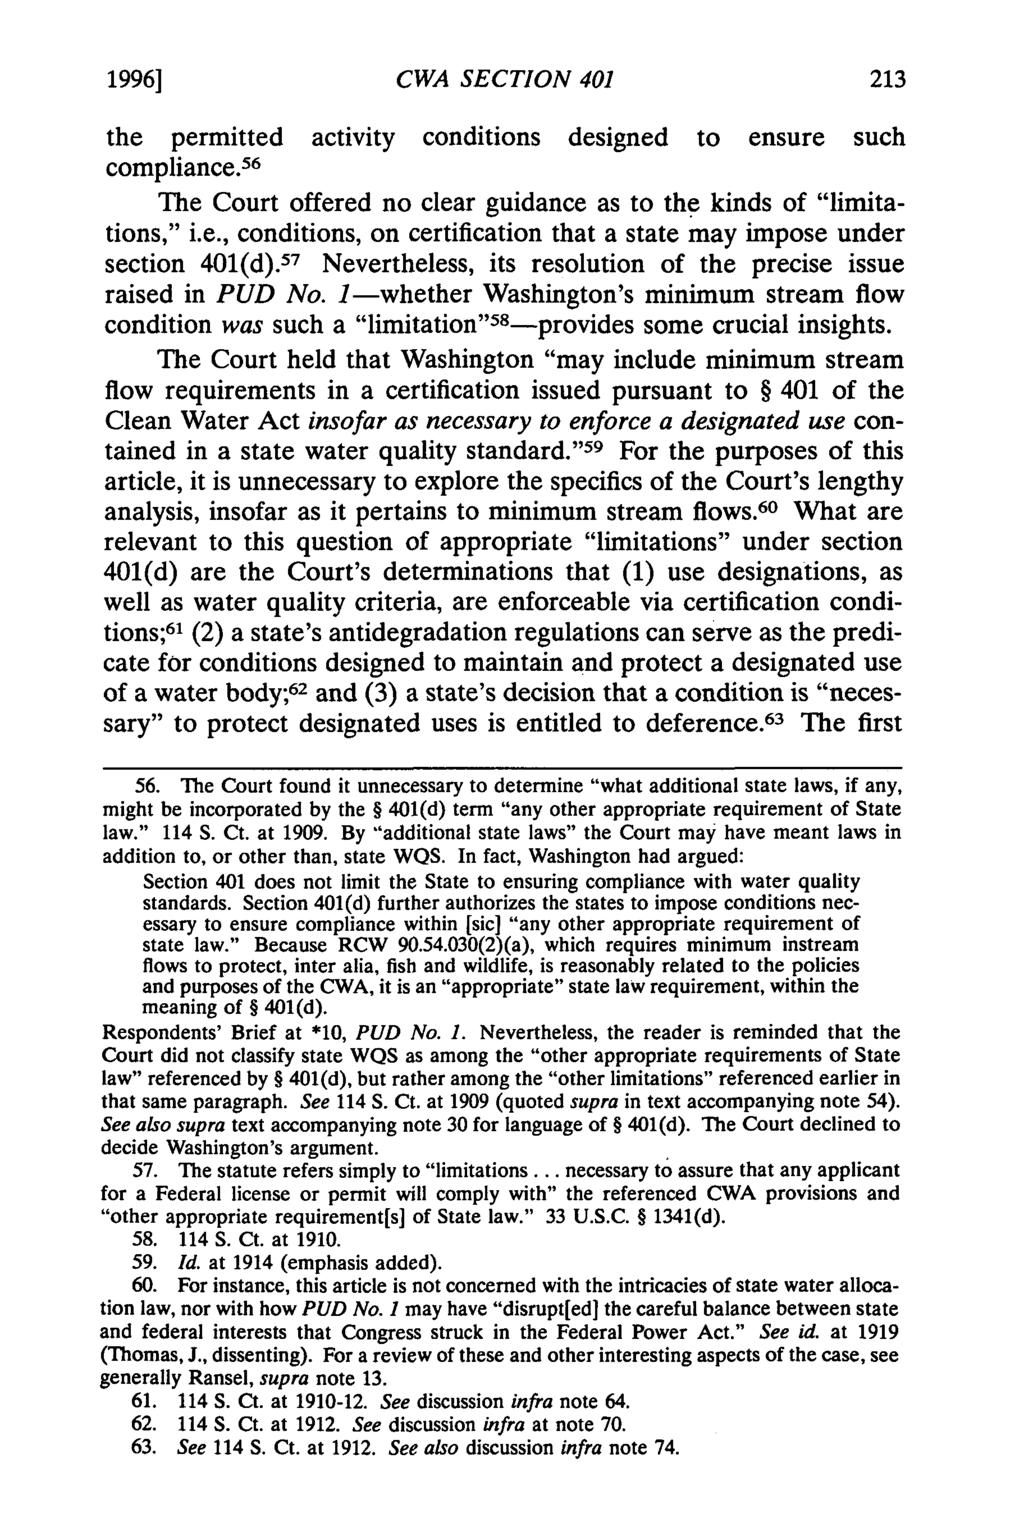 1996] CWA SECTION 401 the permitted activity conditions designed to ensure such compliance. 56 The Court offered no clear guidance as to the kinds of "limitations," i.e., conditions, on certification that a state may impose under section 401(d).